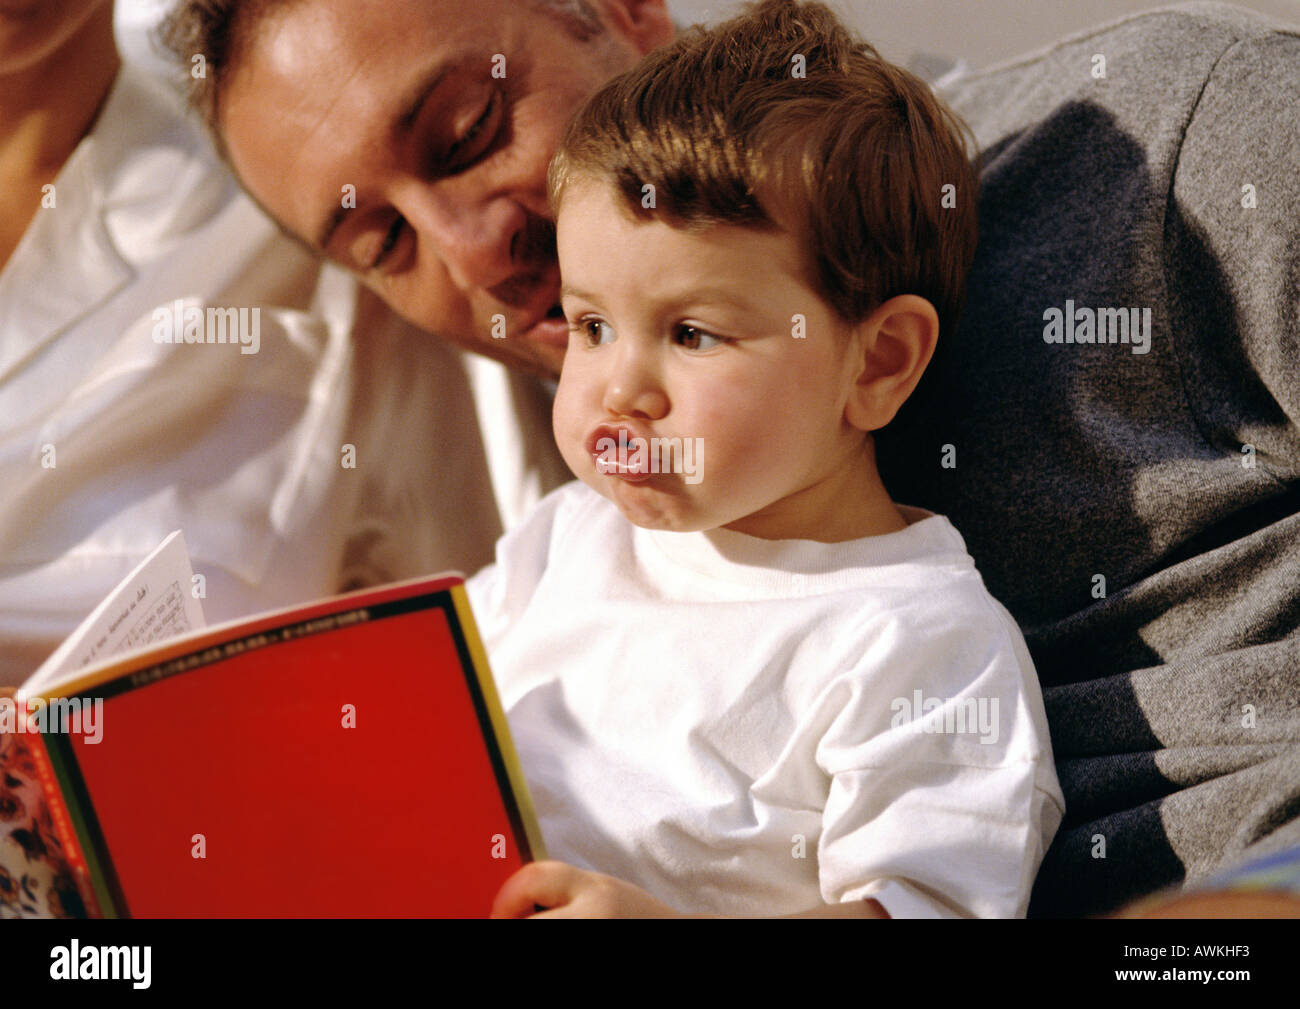 Young child making goofy face, looking at book with older man. Stock Photo